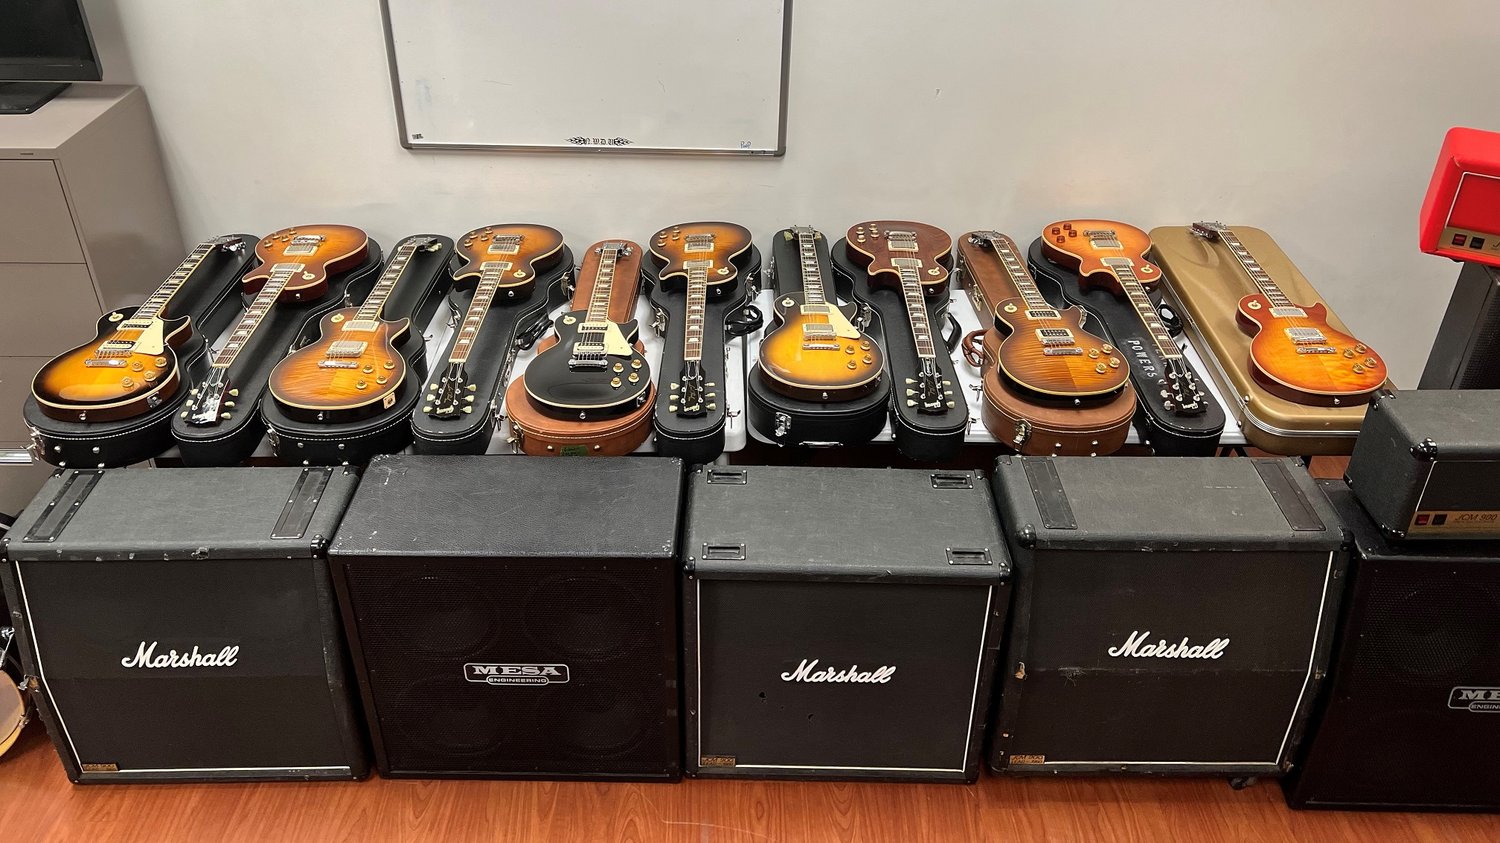 Some of the equipment purchased by Demarest. In total, investigators say Demarest purchased 11 Gibson Les Paul guitars; five amplifier cabinets, three Marshalls and two Mesas; two amplifier heads, both Marshall; several music stands; and a drum kit.